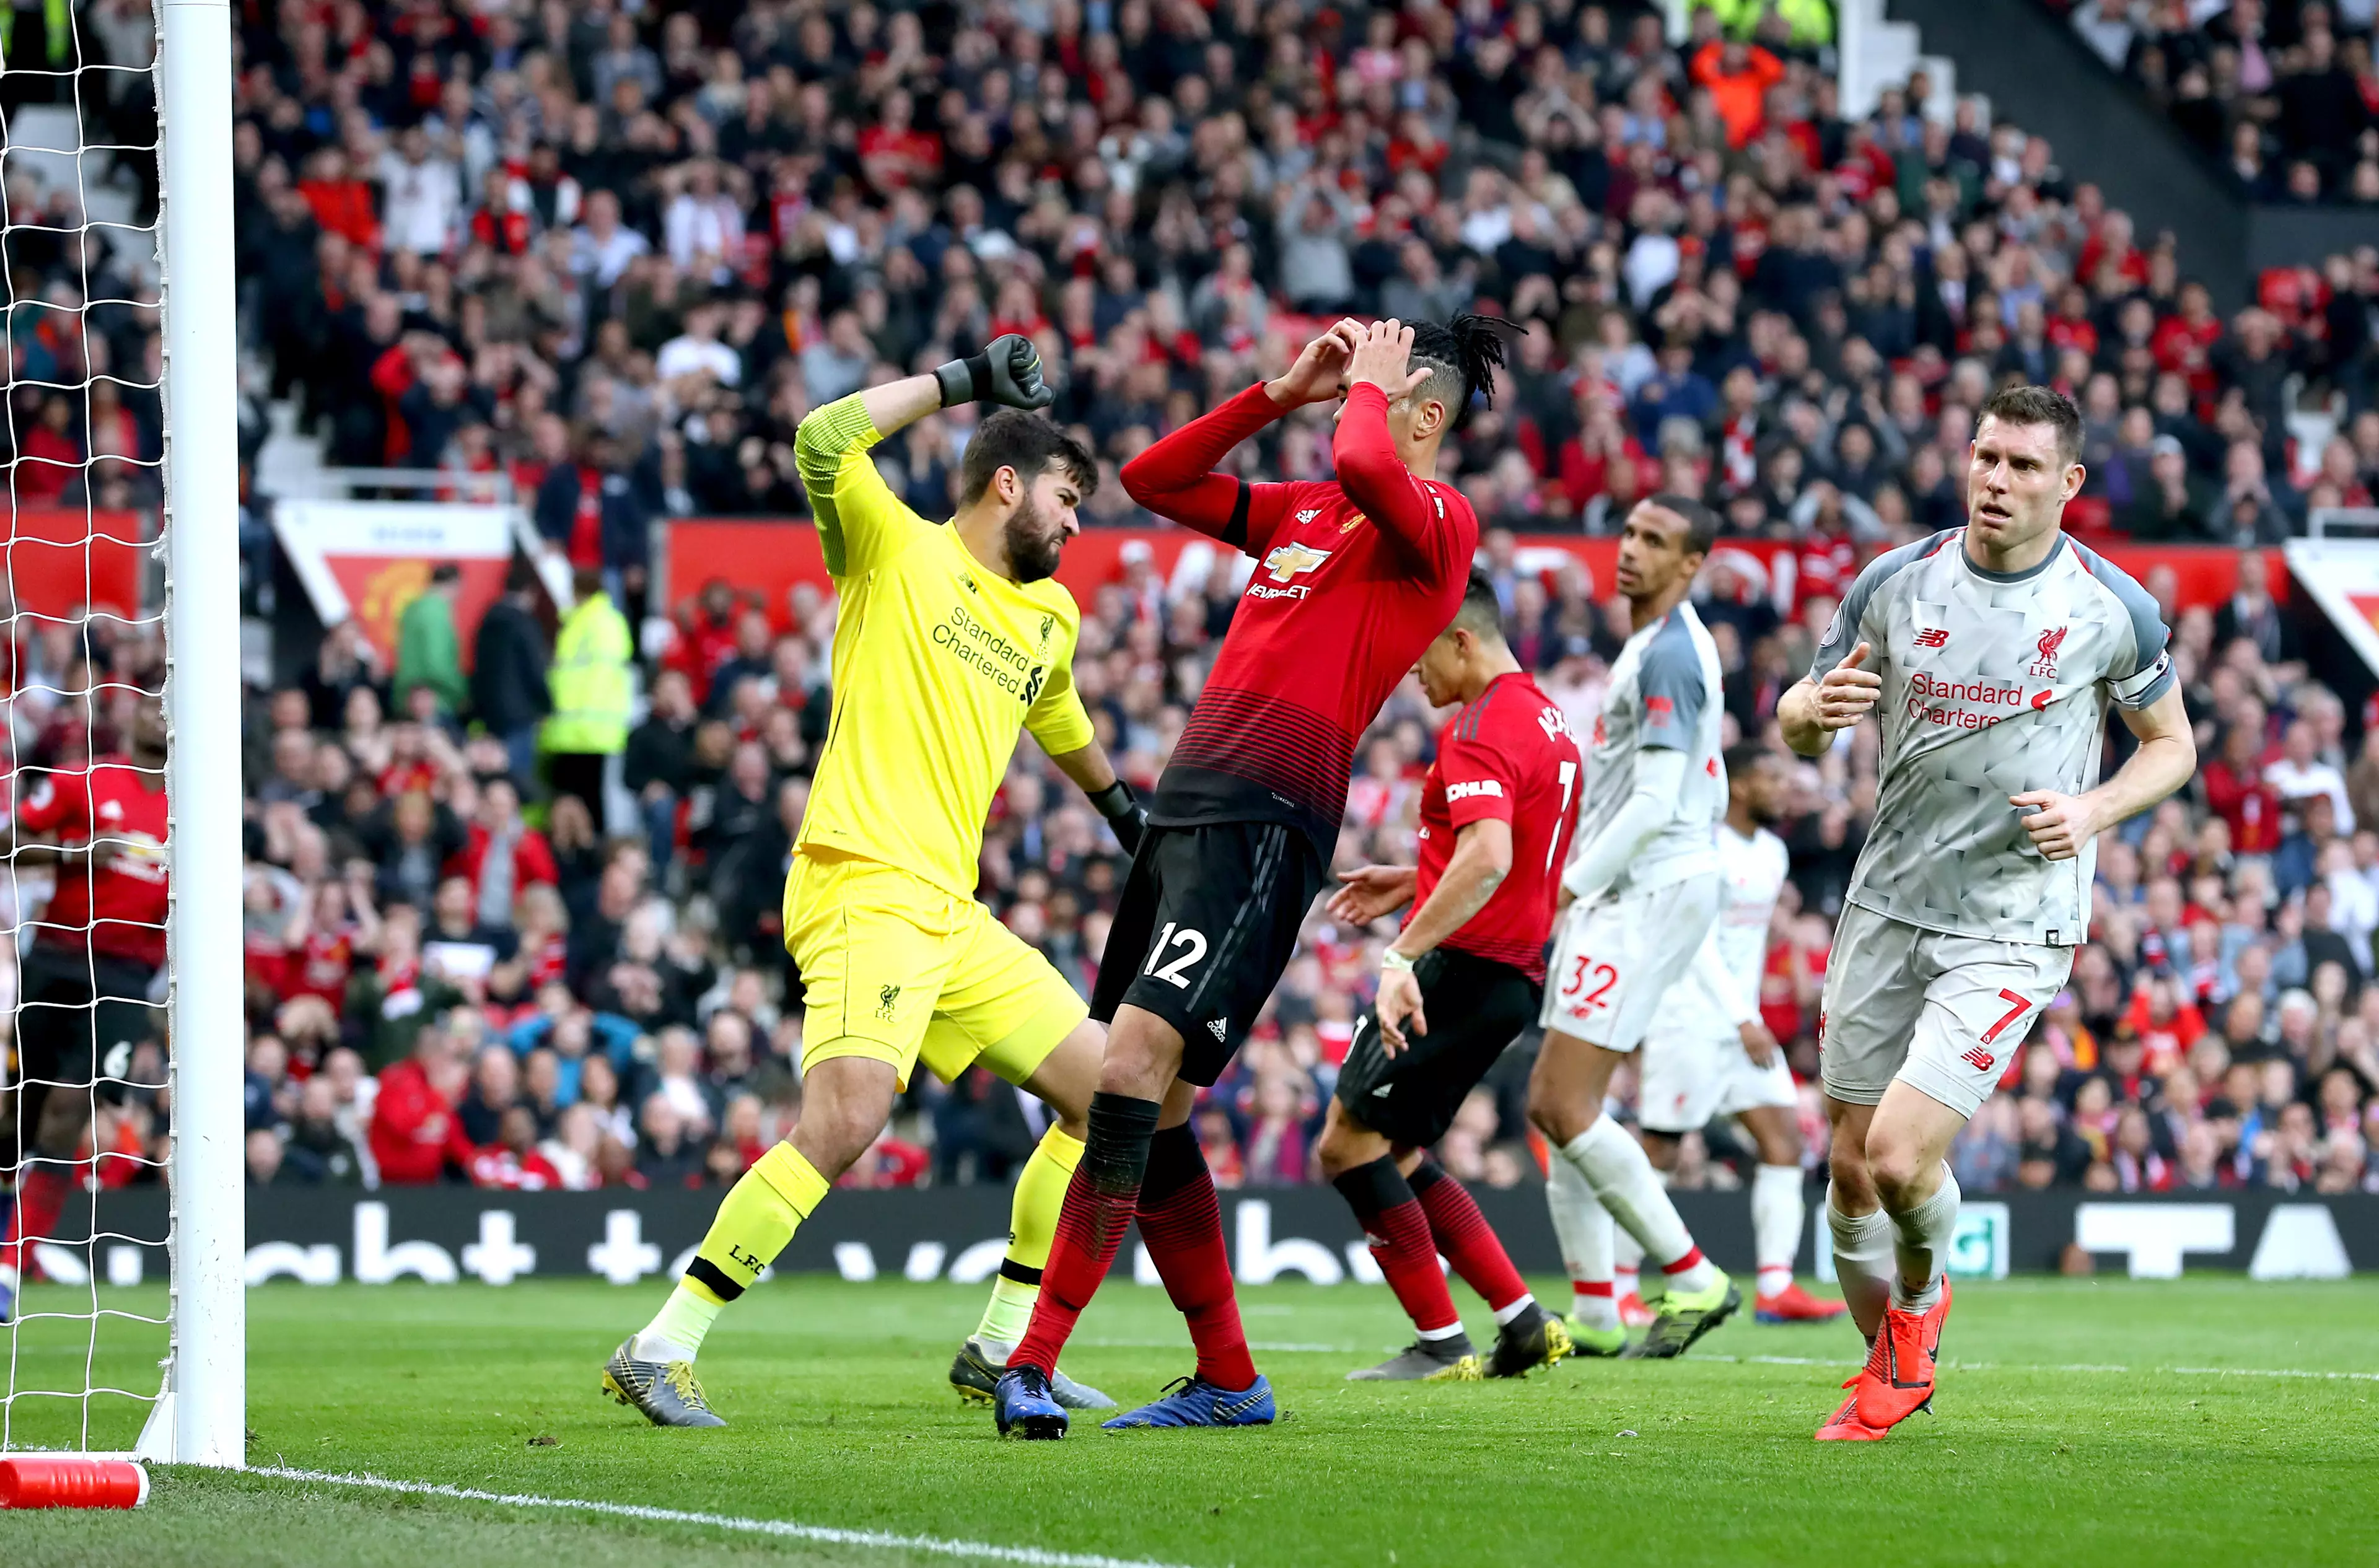 Smalling also missed a chance from a cross that he failed to get to. Image: PA Images